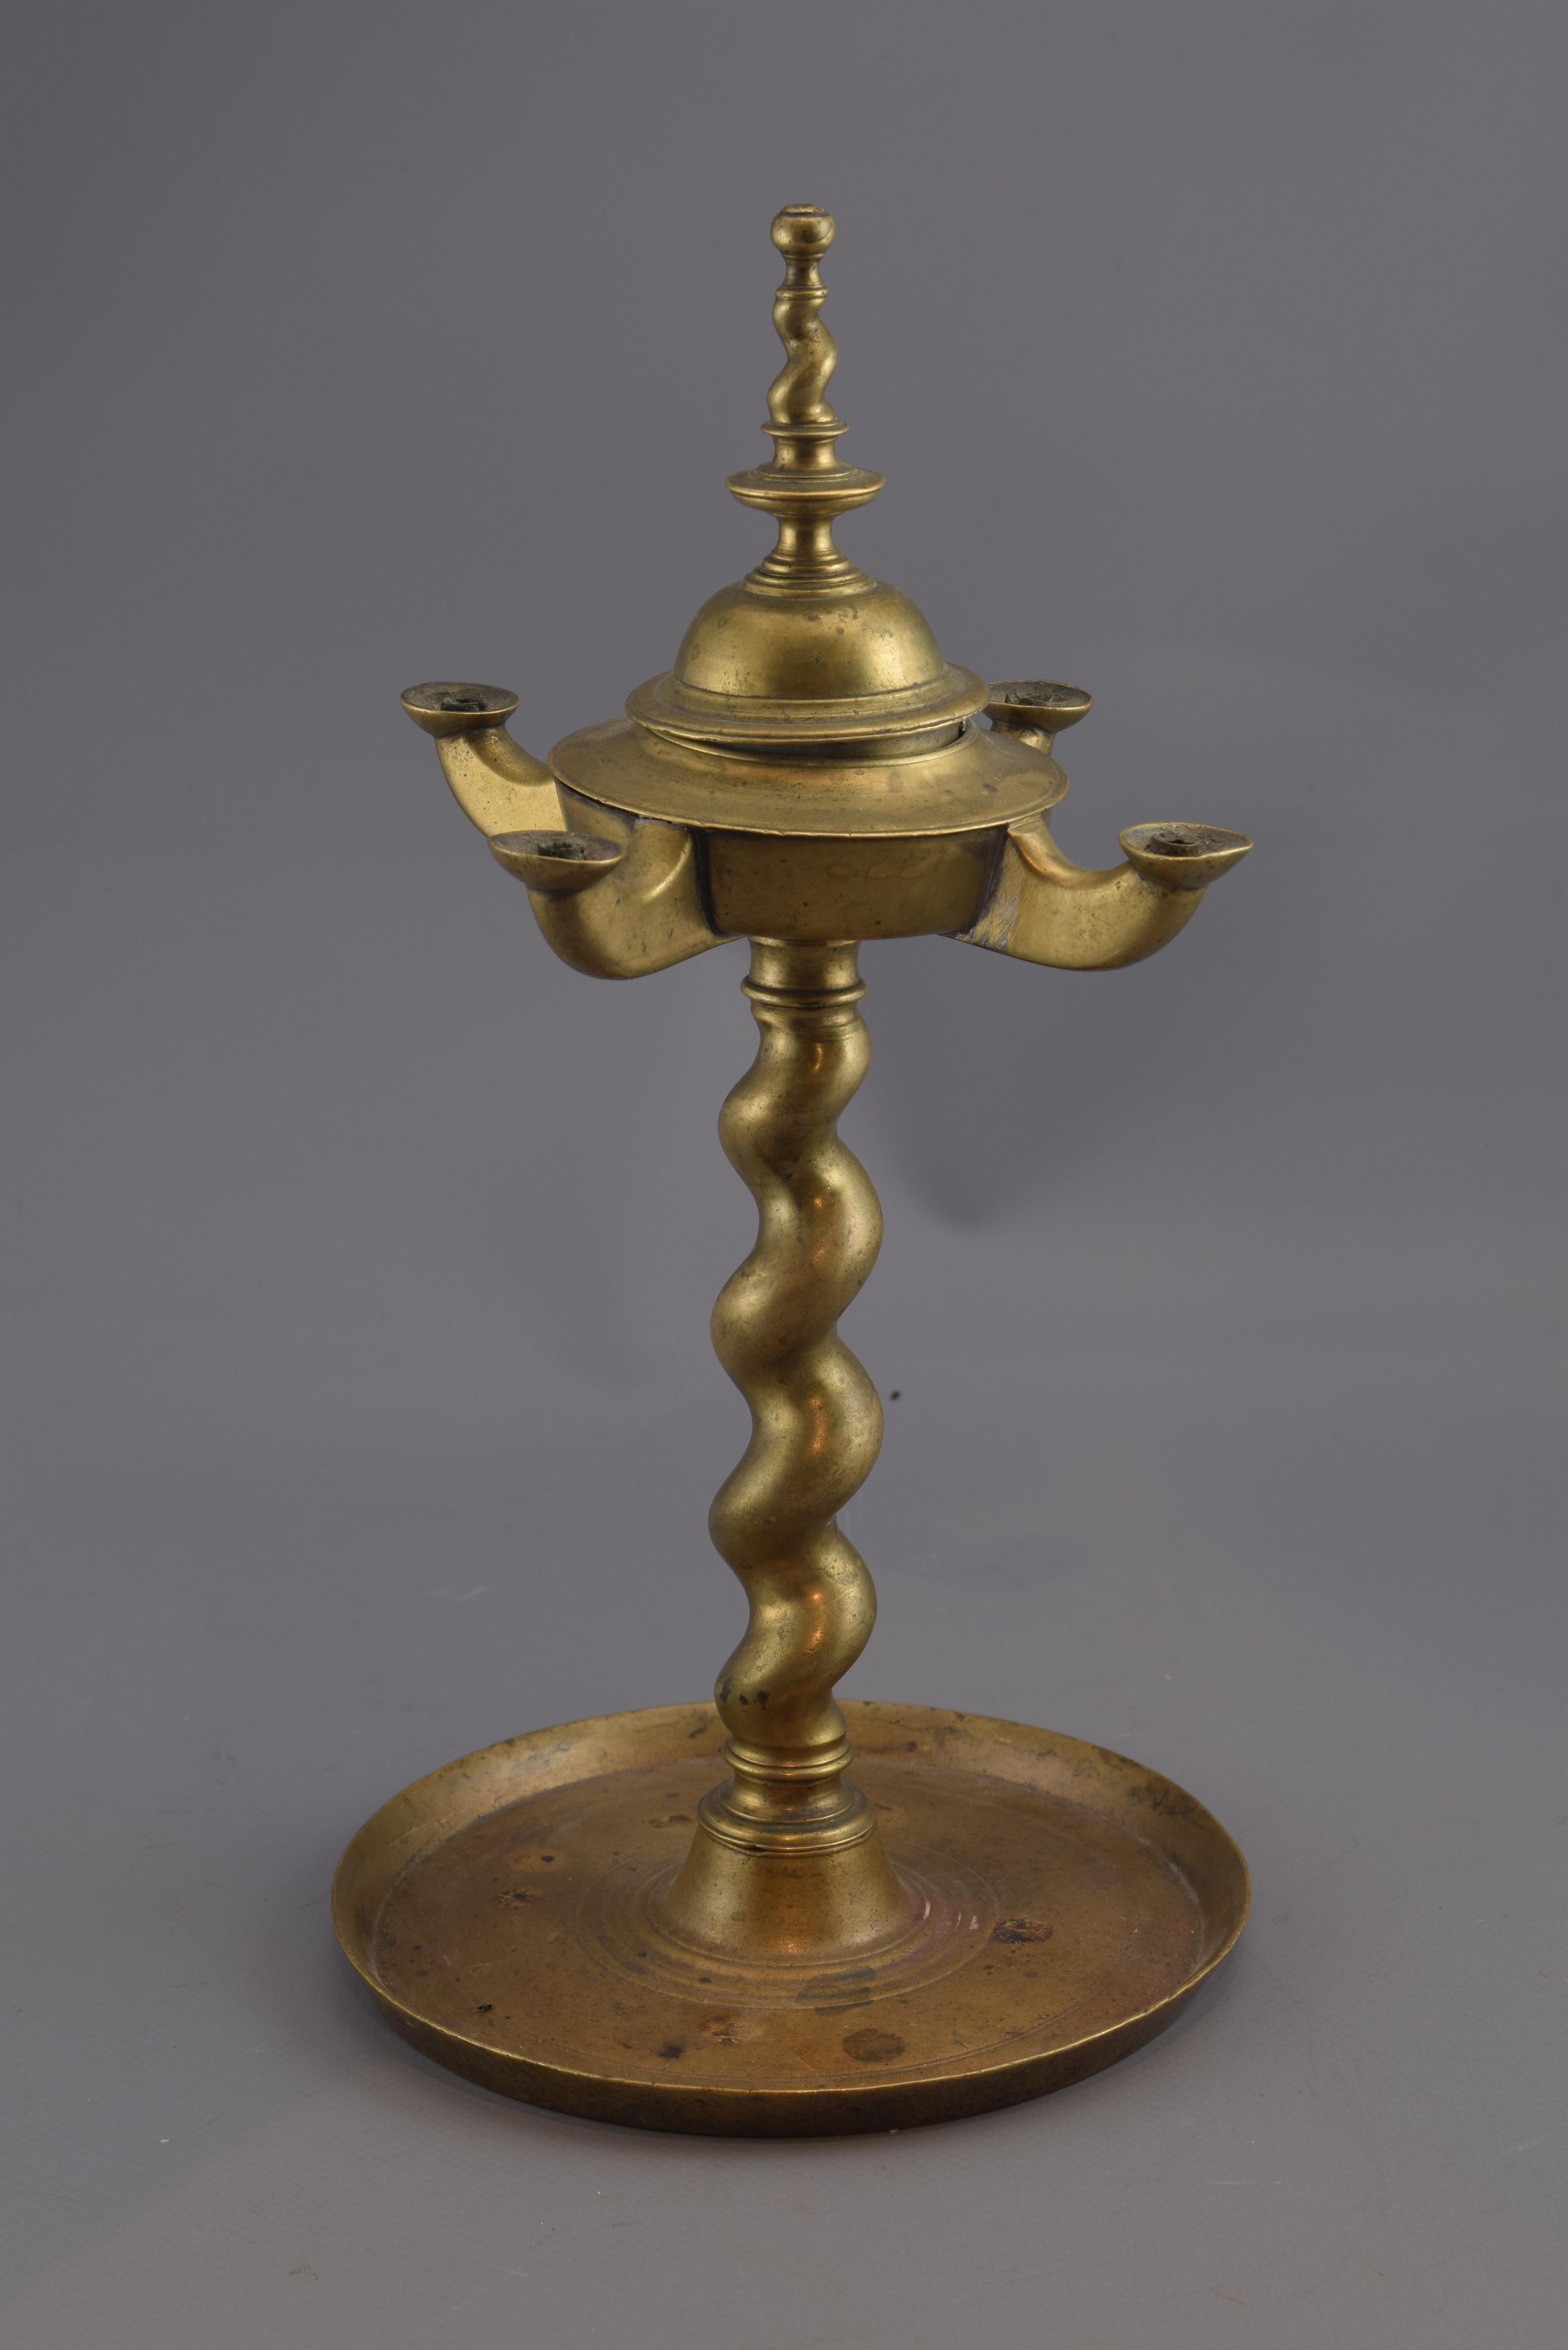 Oil table lamp made entirely of bronze, composed of a circular base decorated with concentric lines, a salomonic foot that is continued at the top of the piece and the container for the oil at the top, which has four points of light. The influence